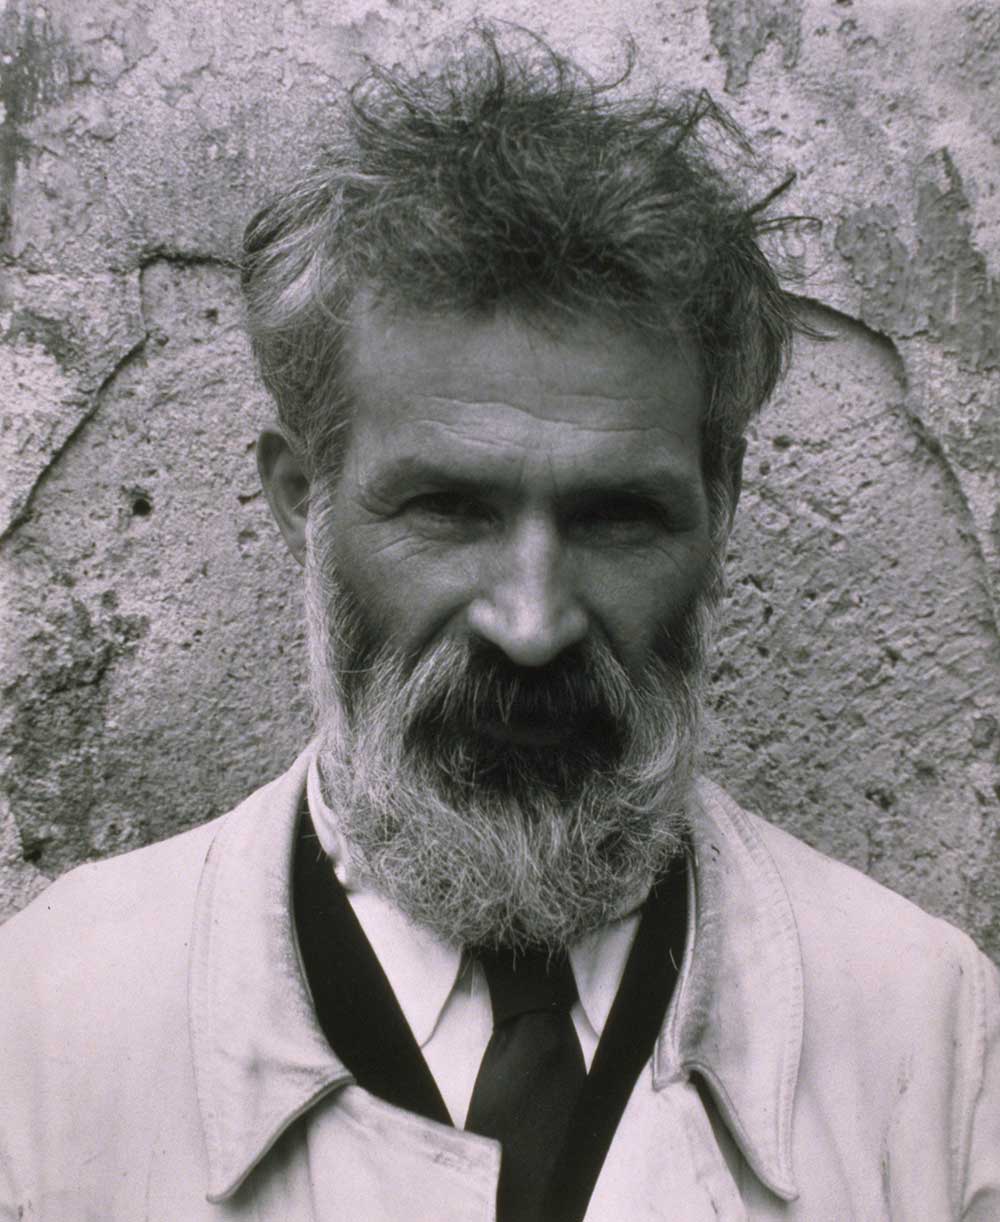 Edward Steichen, Brancusi, Voulangis, France, c. 1922; printed 1987, silver gelatin print, 13 x 10 1/2 inches (image and paper), Gift of Stephen L. Singer and Linda G. Singer.